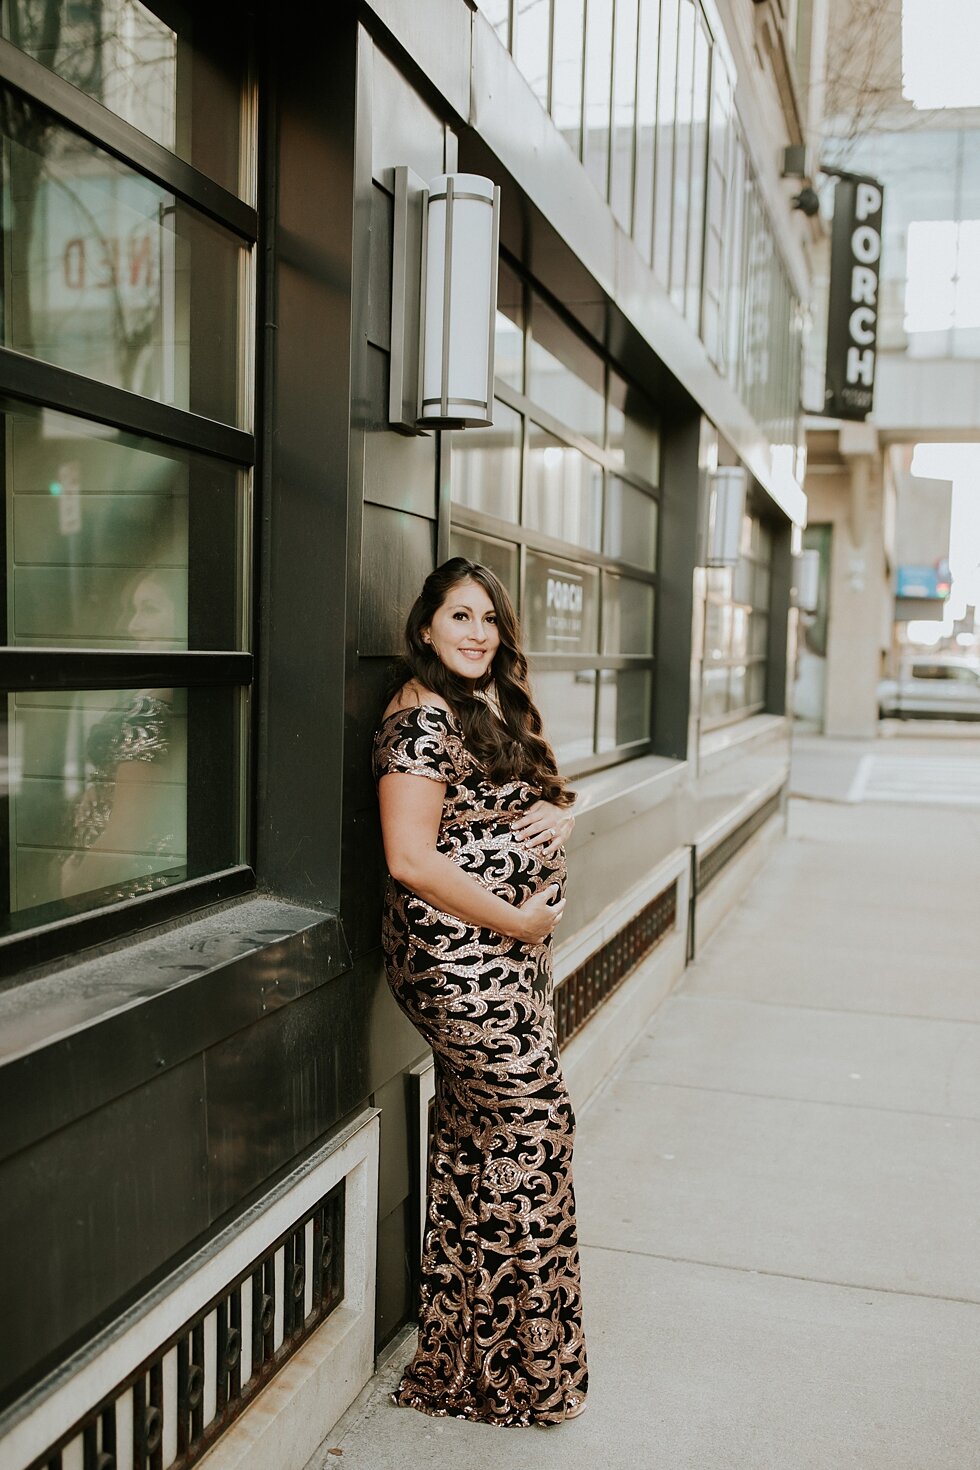  Gorgeous mom to be holding her baby bump during her formal maternity session. #maternitygoals #maternityphotographer #babybump #kentuckyphotographer #fancymaternitysession #modernmaternitysession #urbanmaternitysession #dressymaternitysession #india